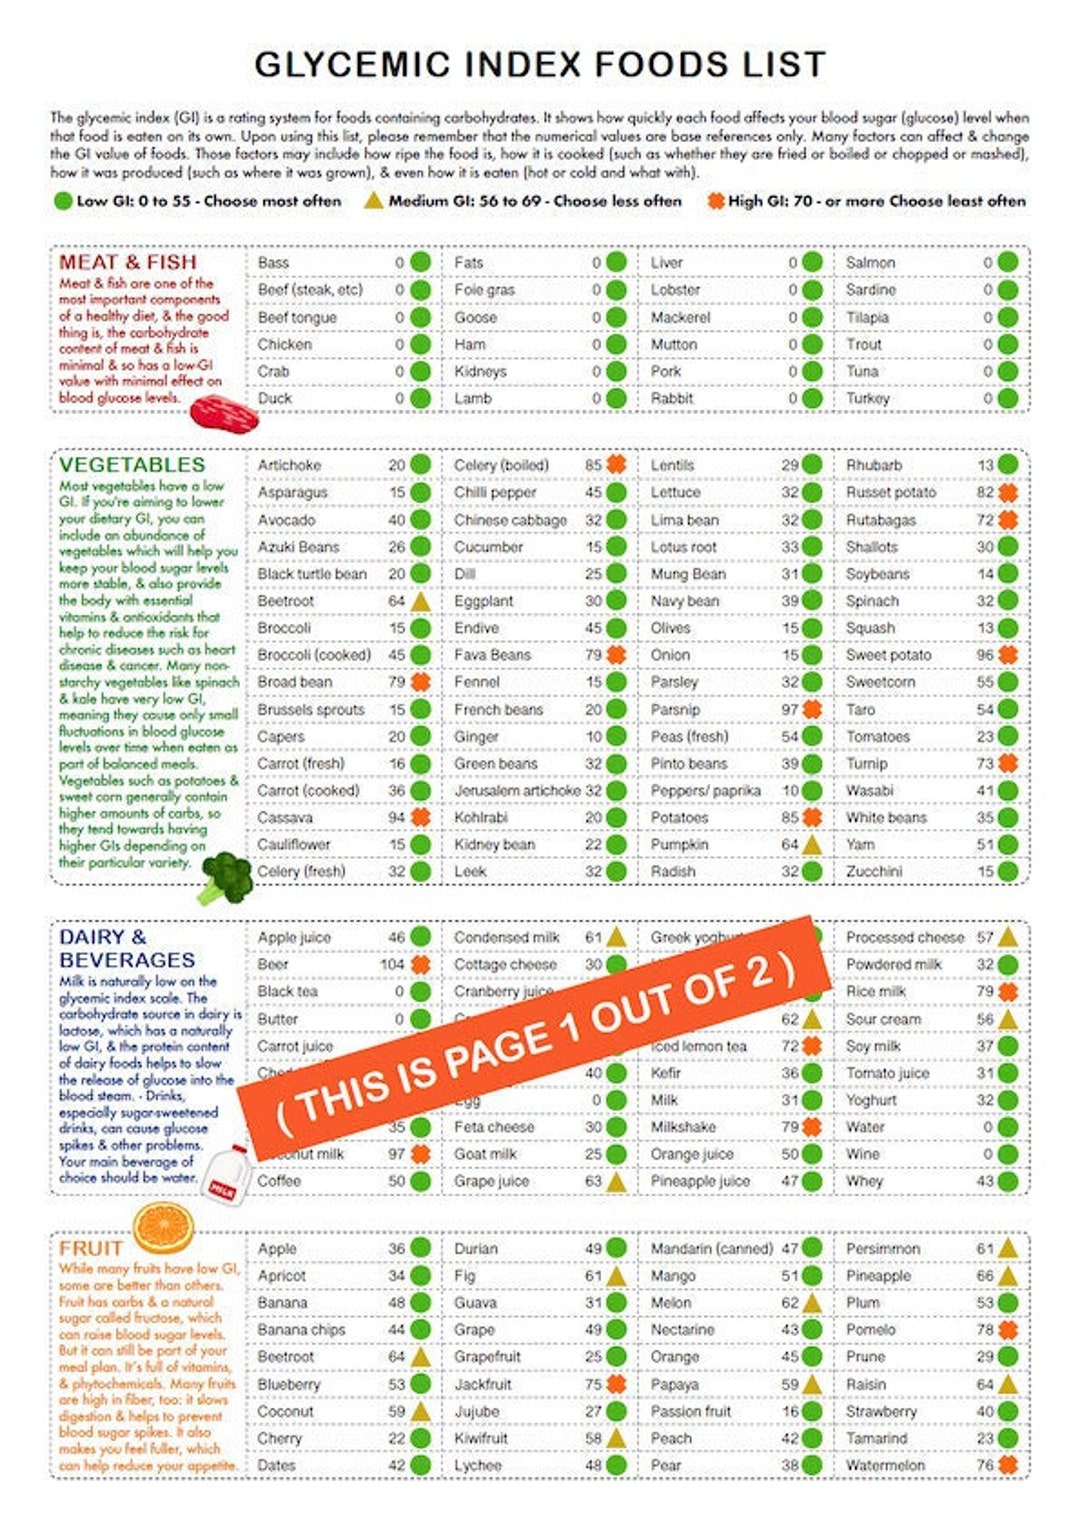 Glycemic Index Foods List / At-A-Glance / 2 Page Pdf Printable - Etsy